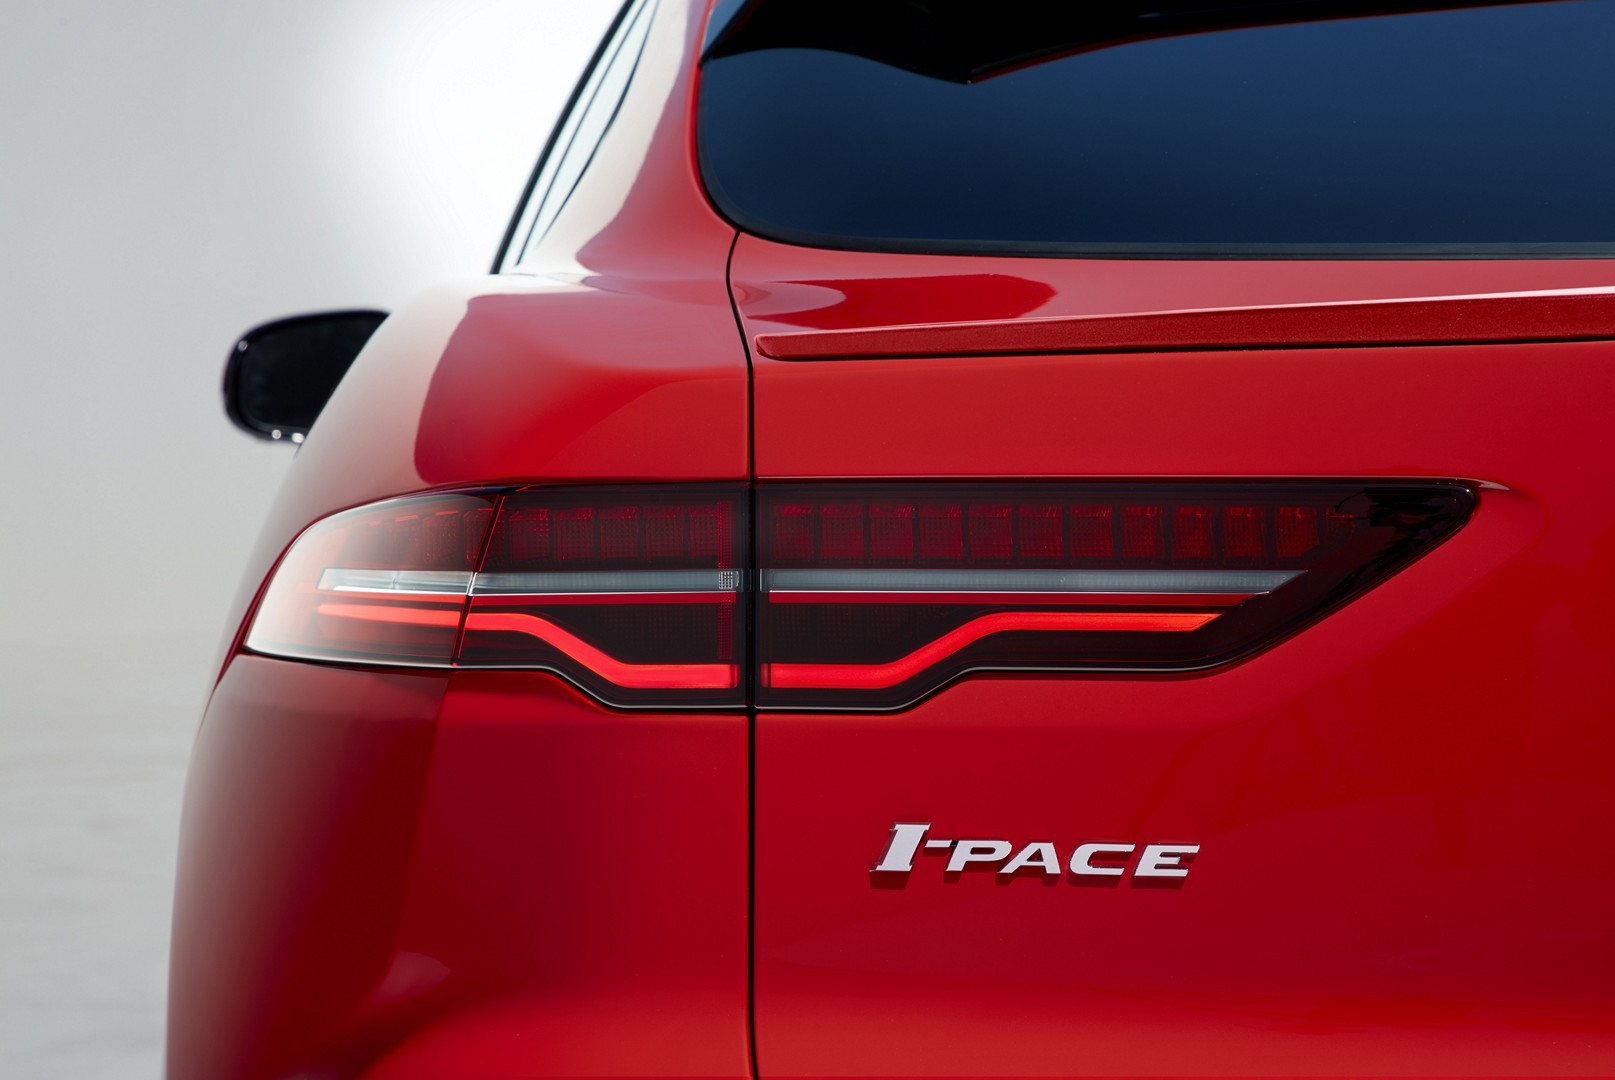 https://s1.cdn.autoevolution.com/images/news/gallery/2020-jaguar-i-pace-update-offers-234-miles-of-range-thanks-to-etrophy-know-how_19.jpg